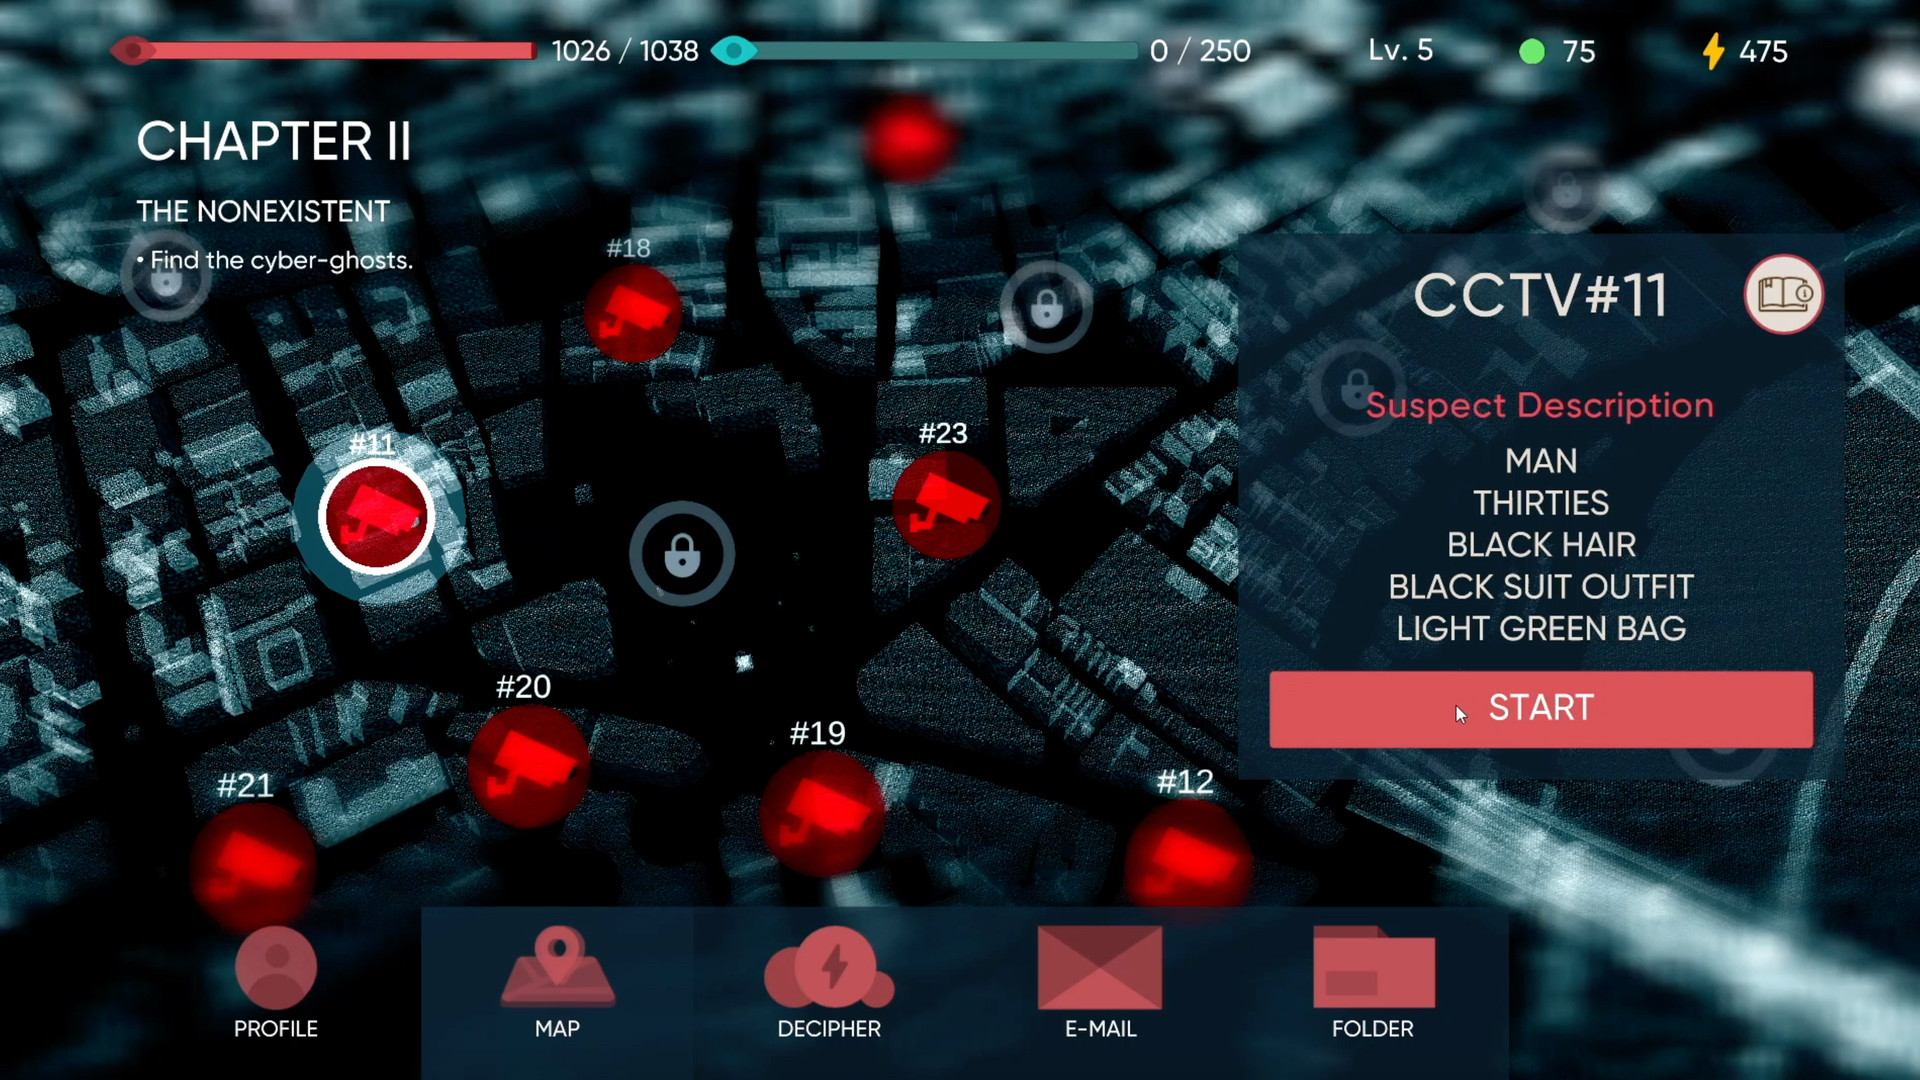 Recontact London: Cyber Puzzle Free Download